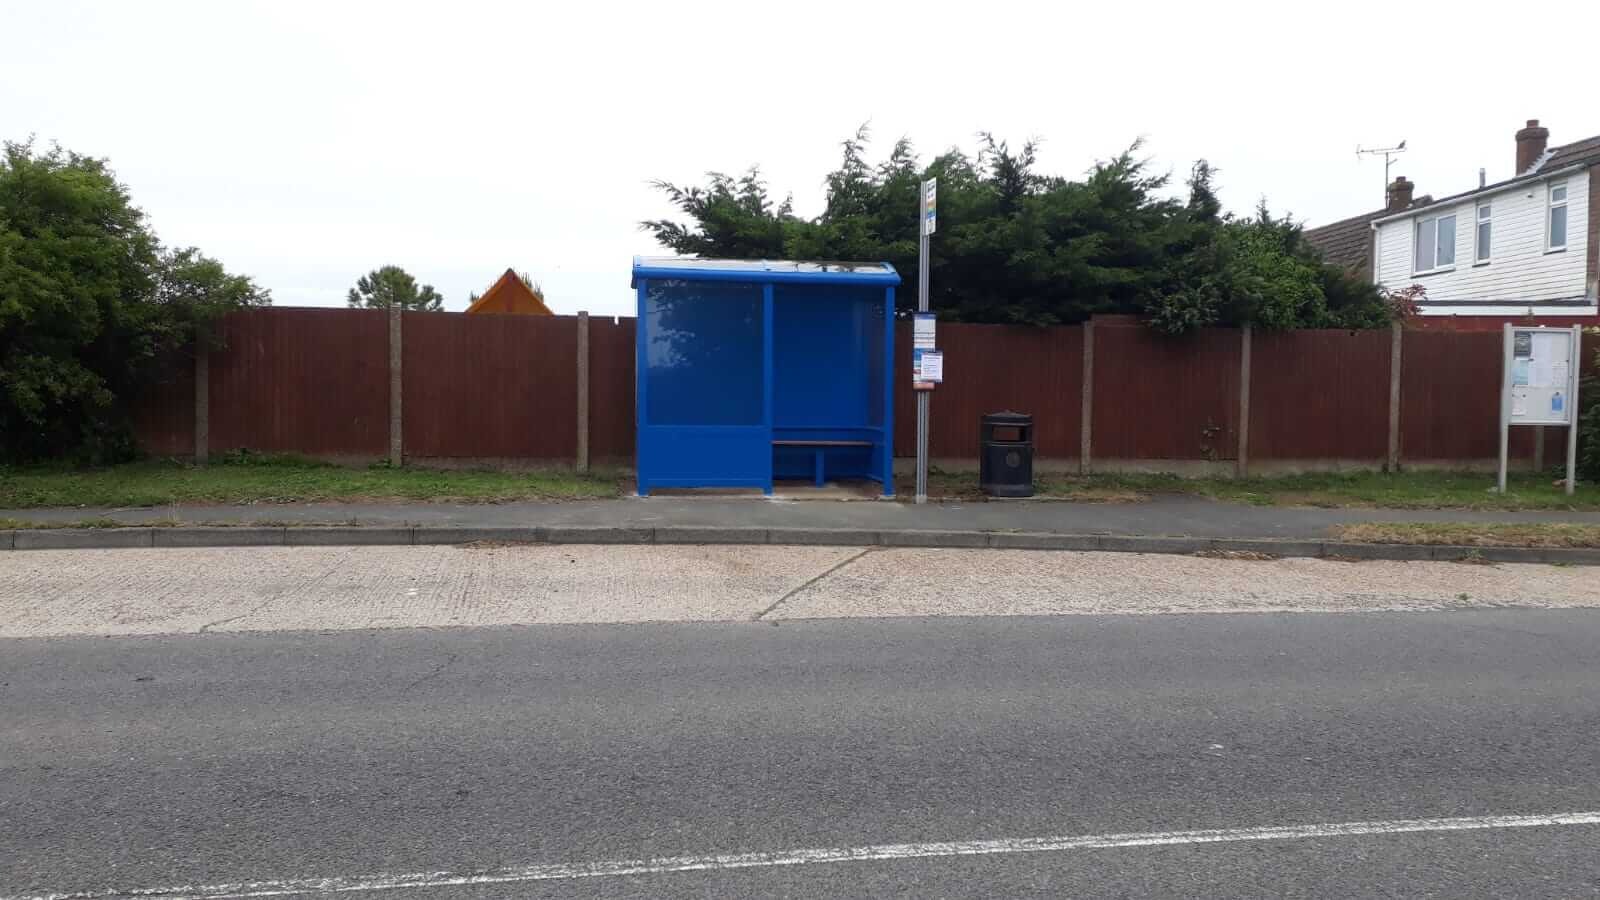 2 Bay Enclosed Heritage Bus Shelter with solid aluminium rear/lower panels and bench seating